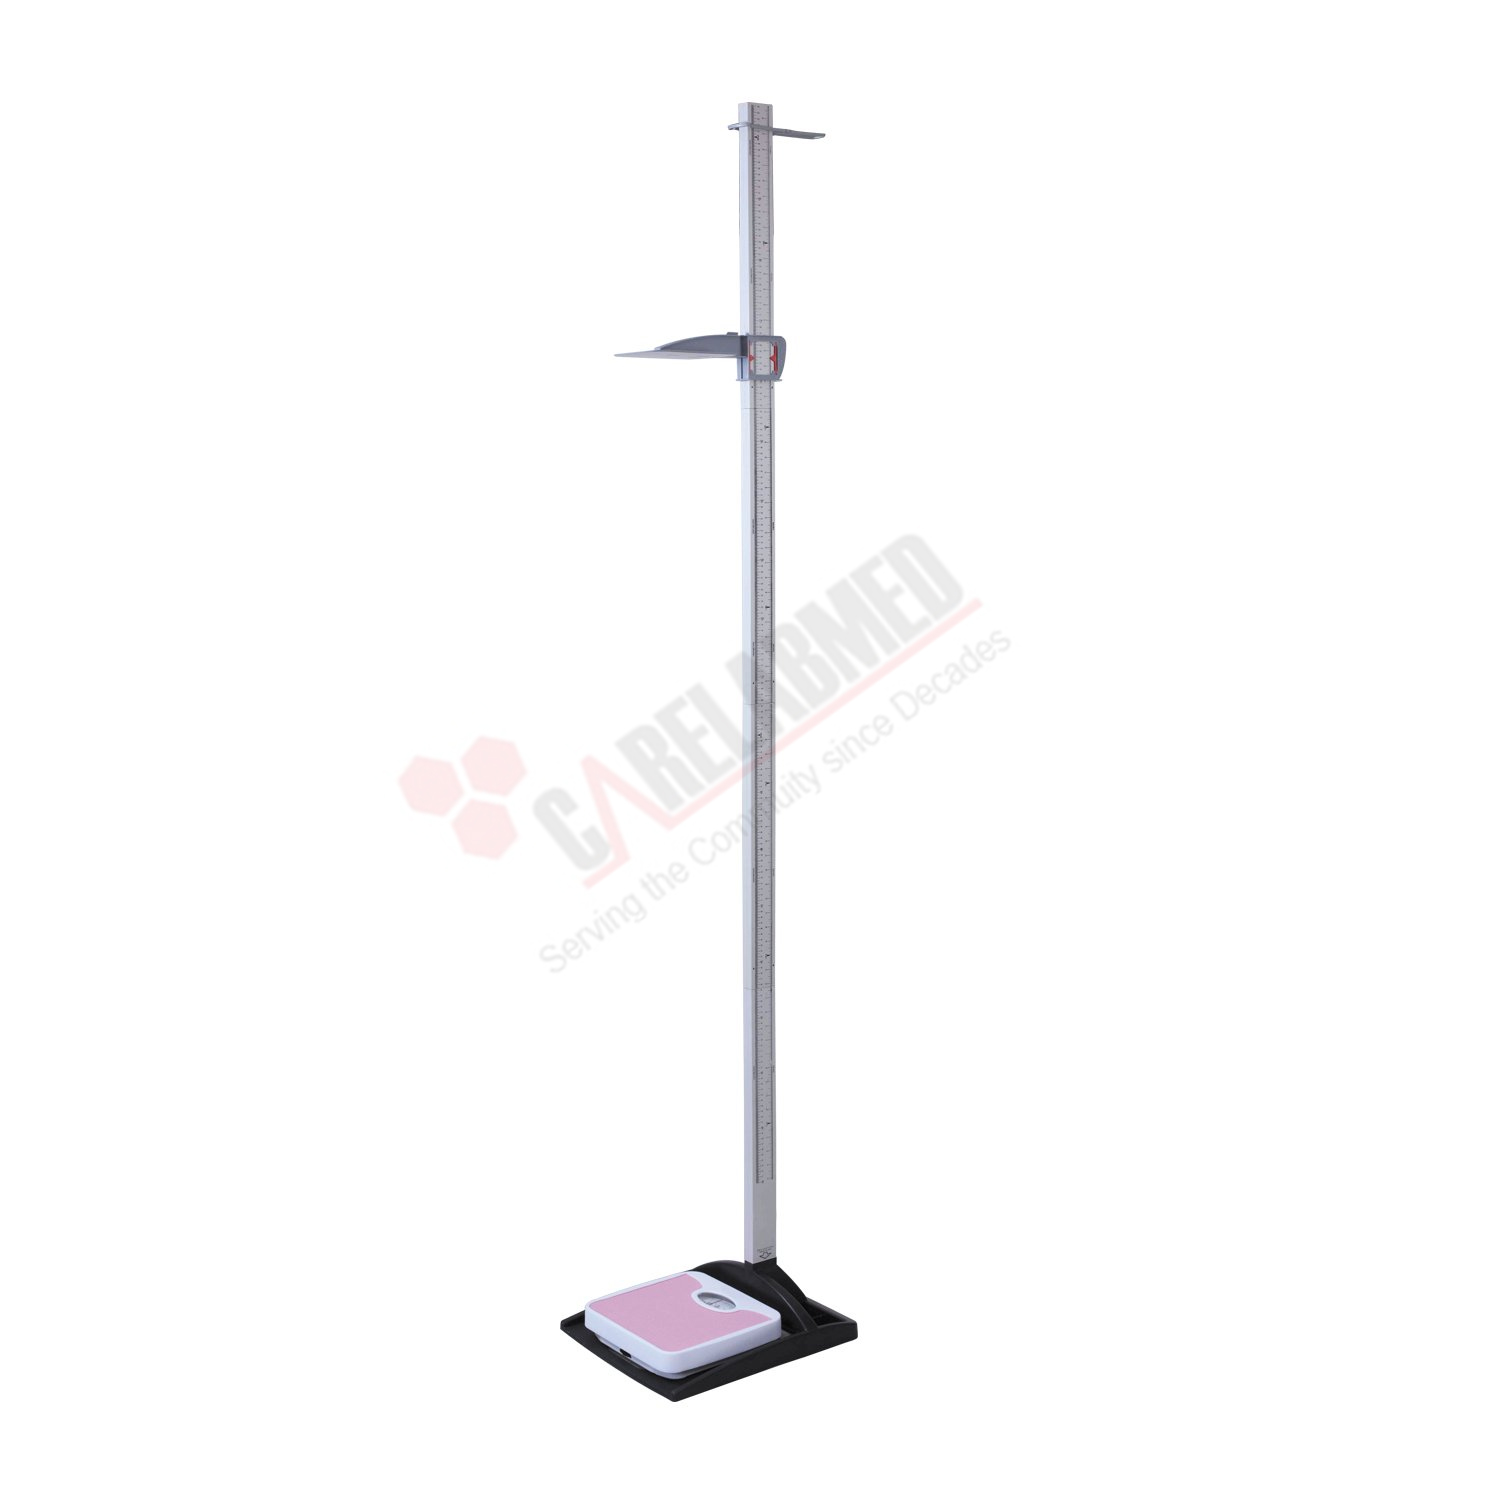 admin/assets/img/sub-category/HEIGHT SCALE MECHANICAL WEIGHING SCALE.jpg